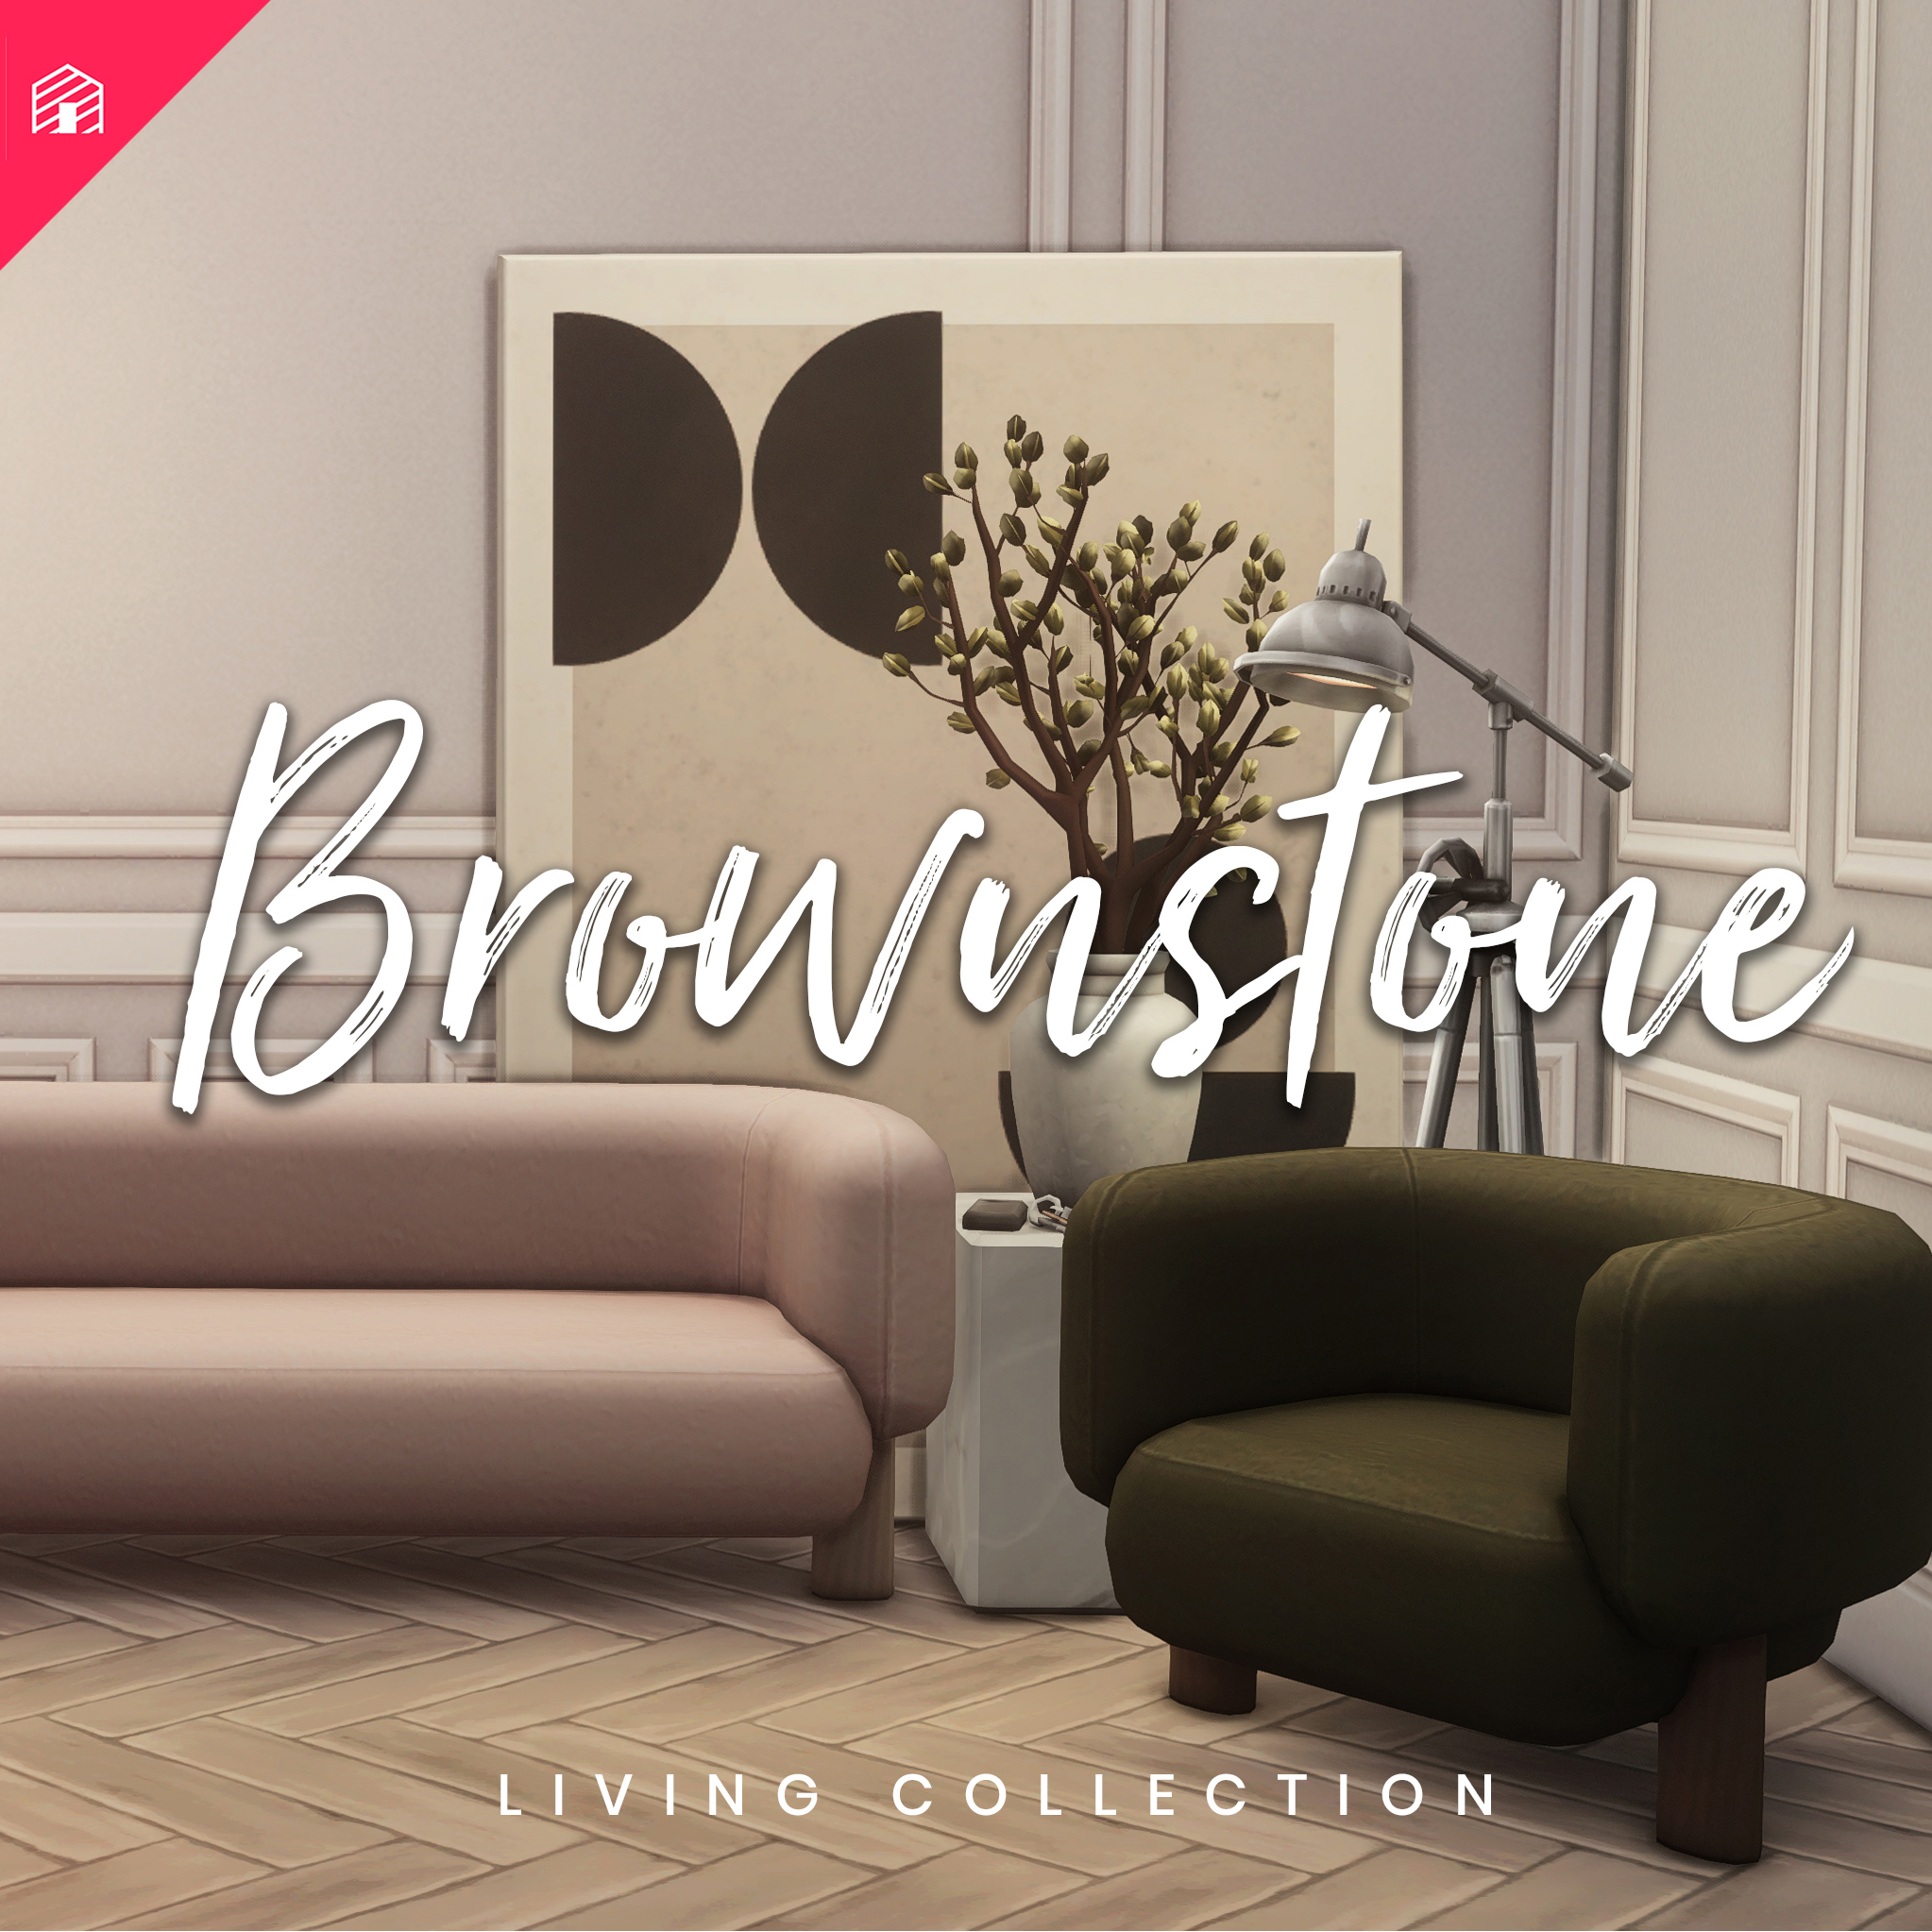 Brownstone Collection - Part 3 project avatar